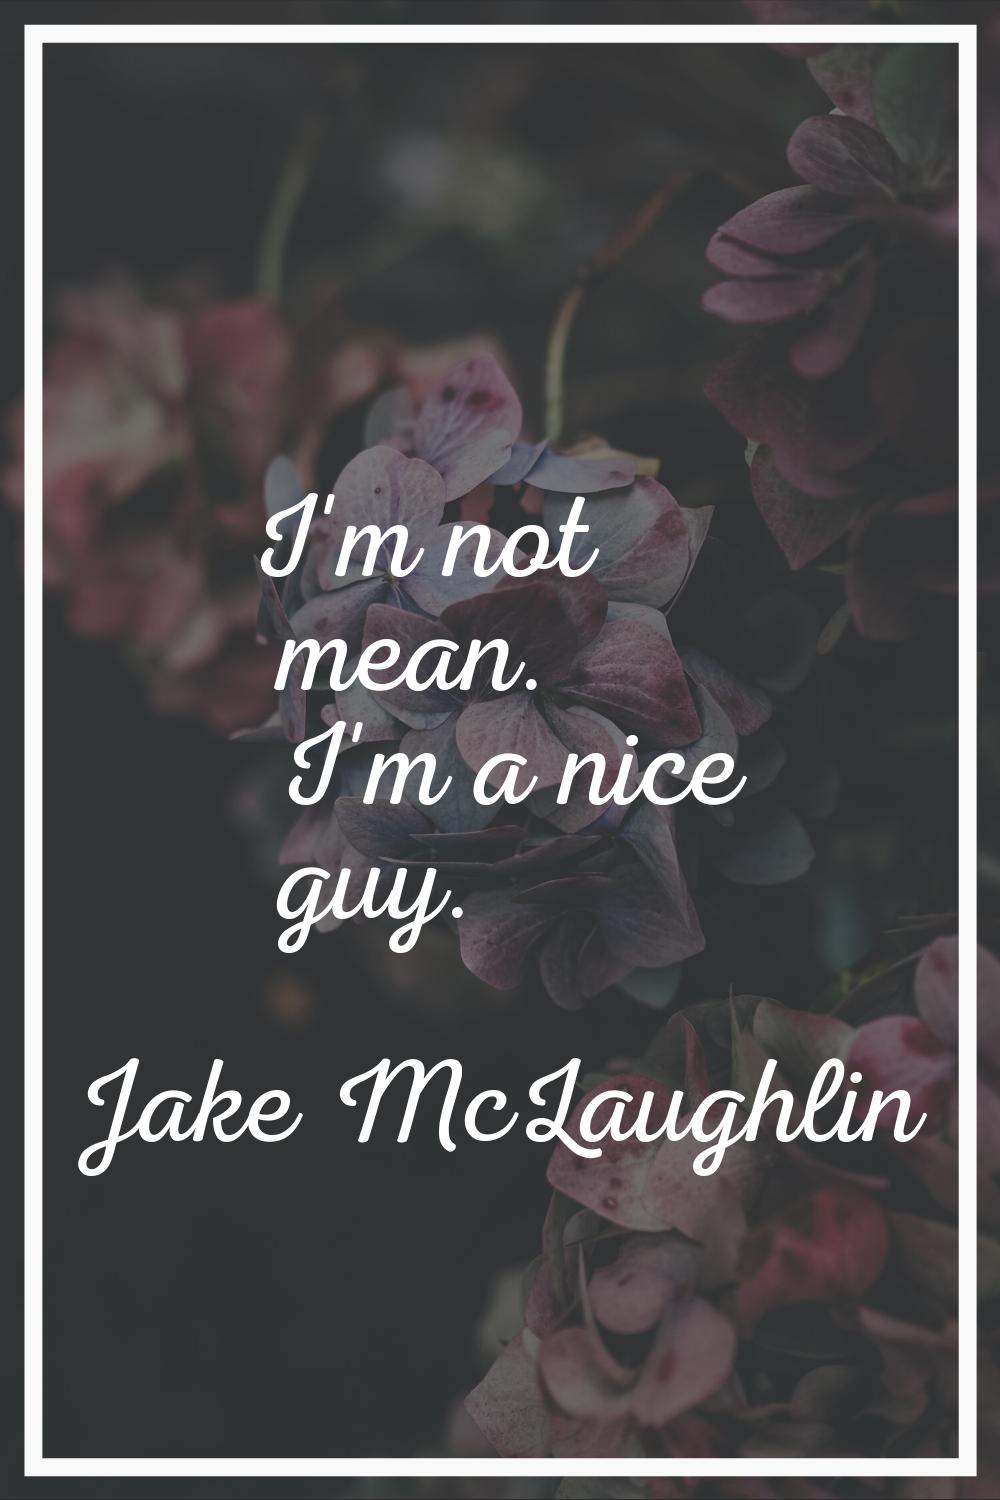 I'm not mean. I'm a nice guy.